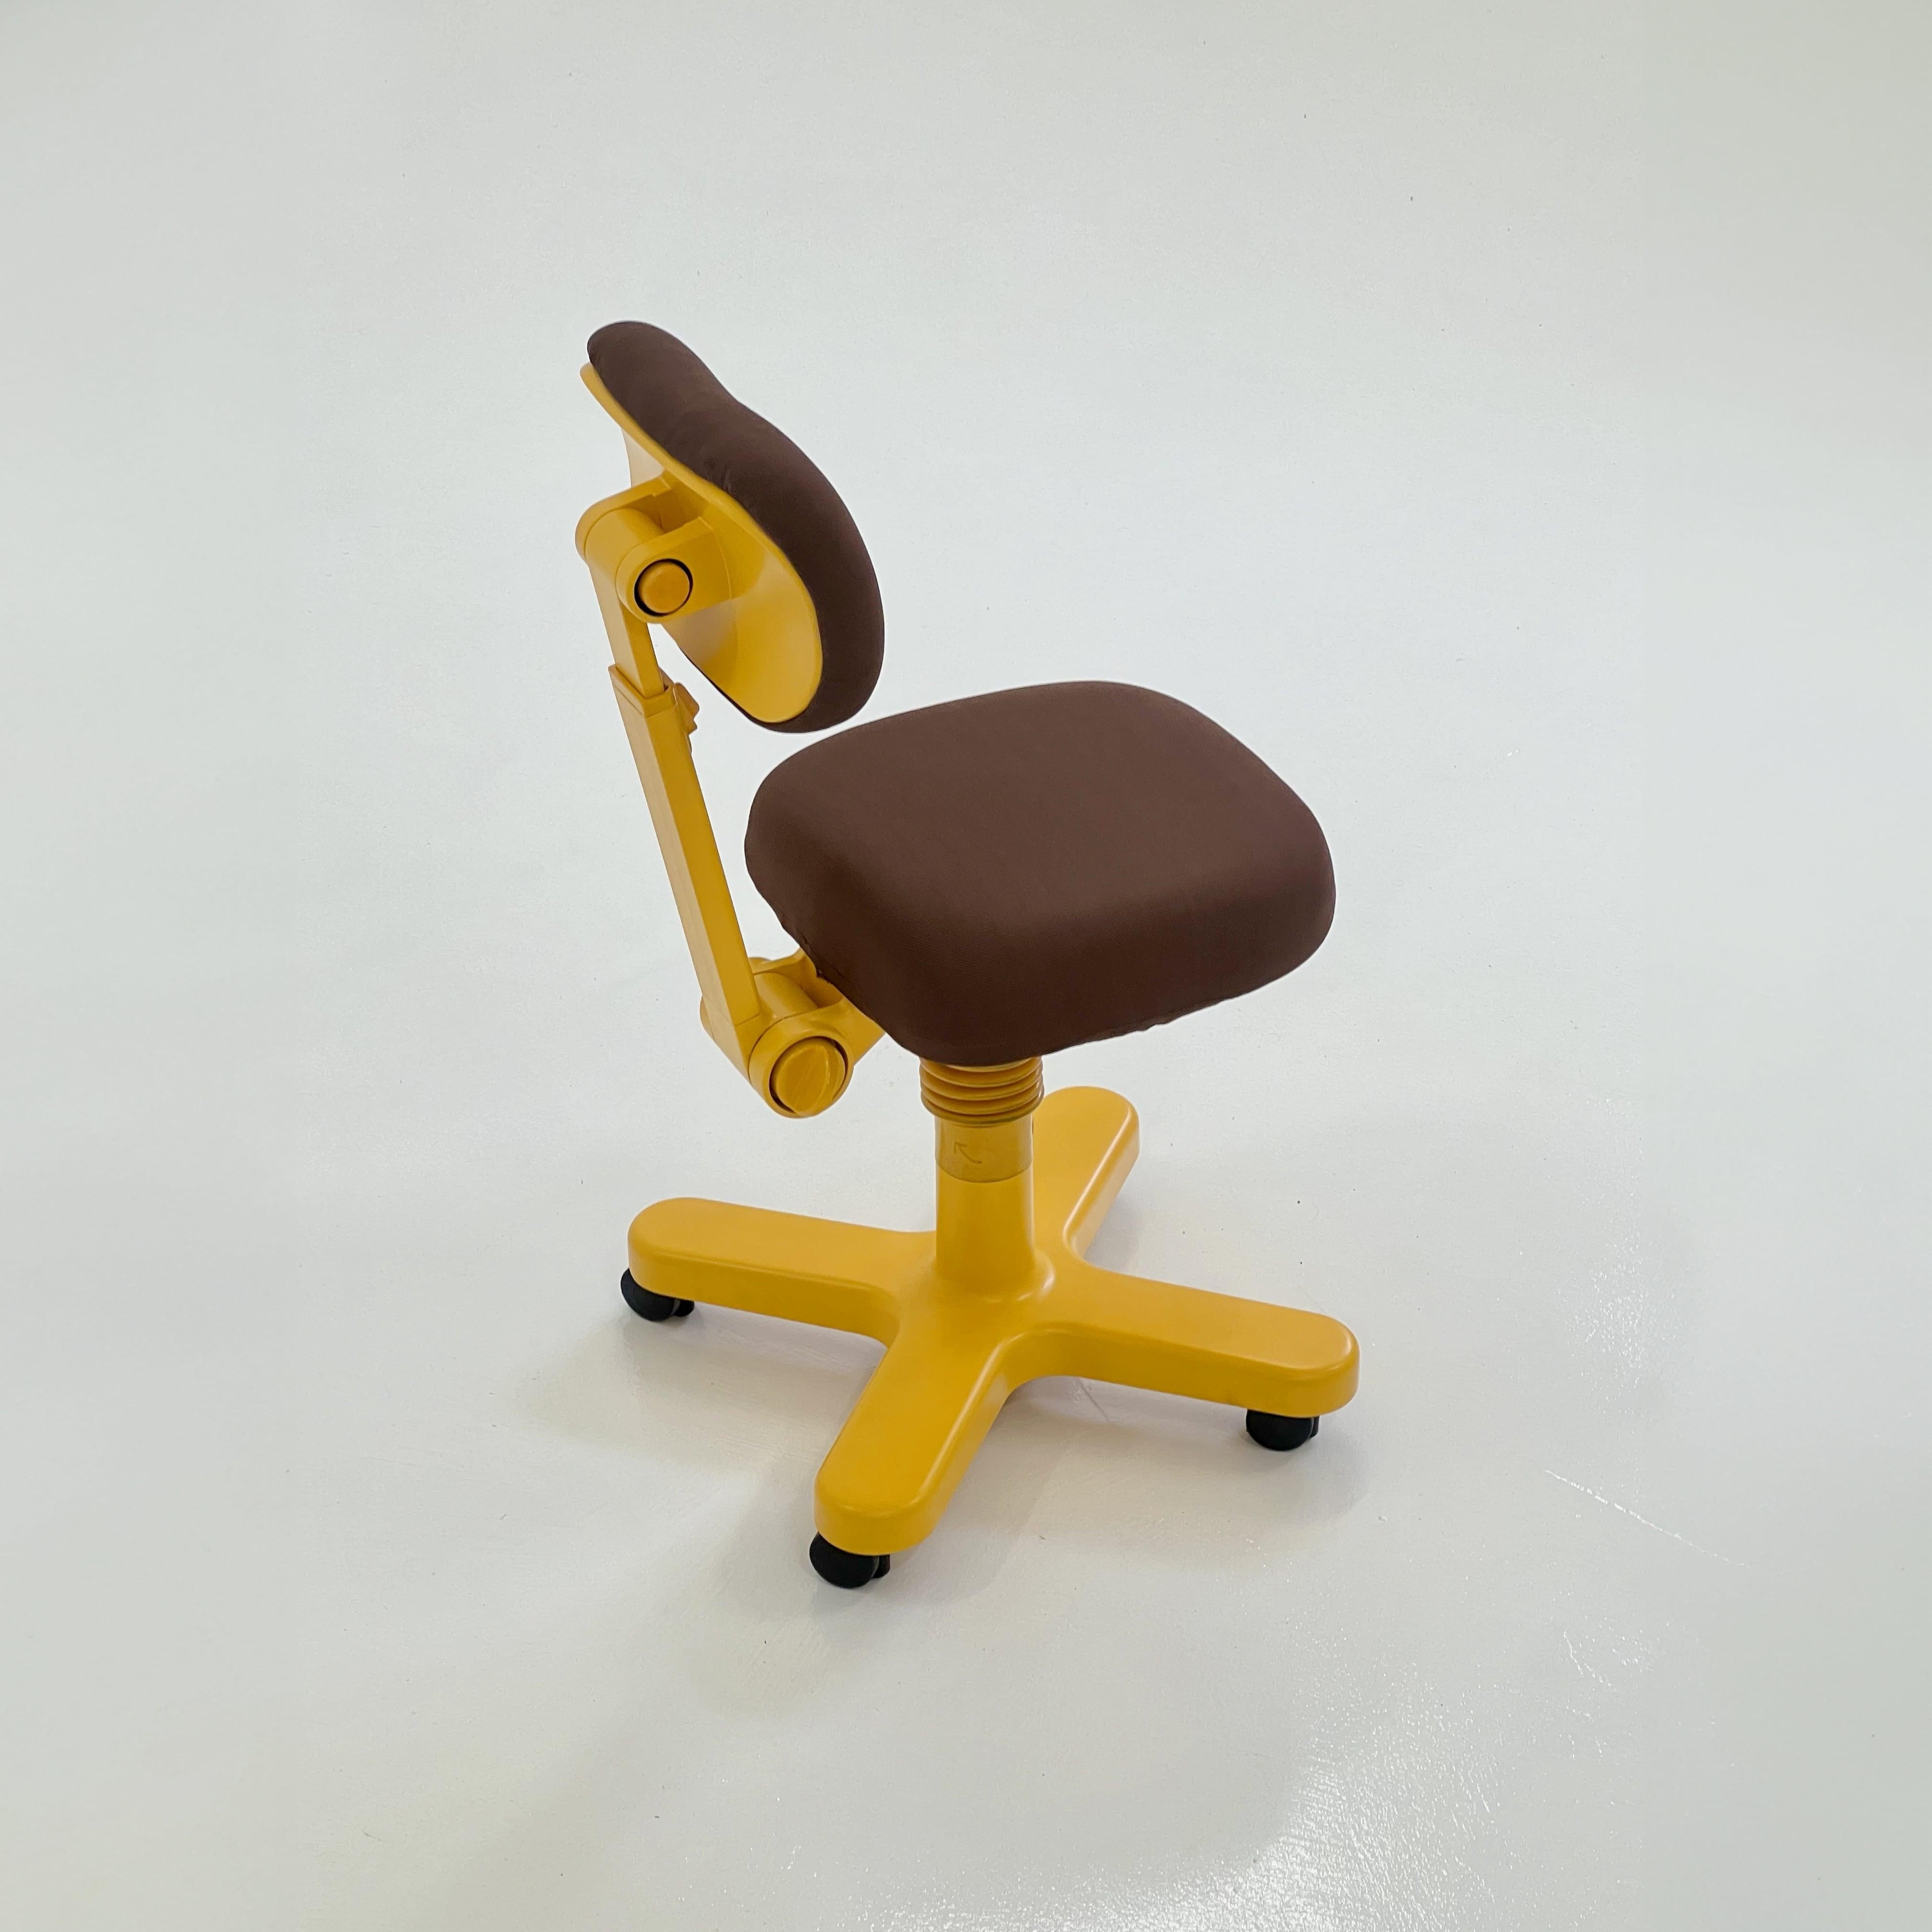  Desk Chair Mod.Synthesis 45 Designed by Ettore Sottsass for Olivetti, Italy 197 For Sale 4